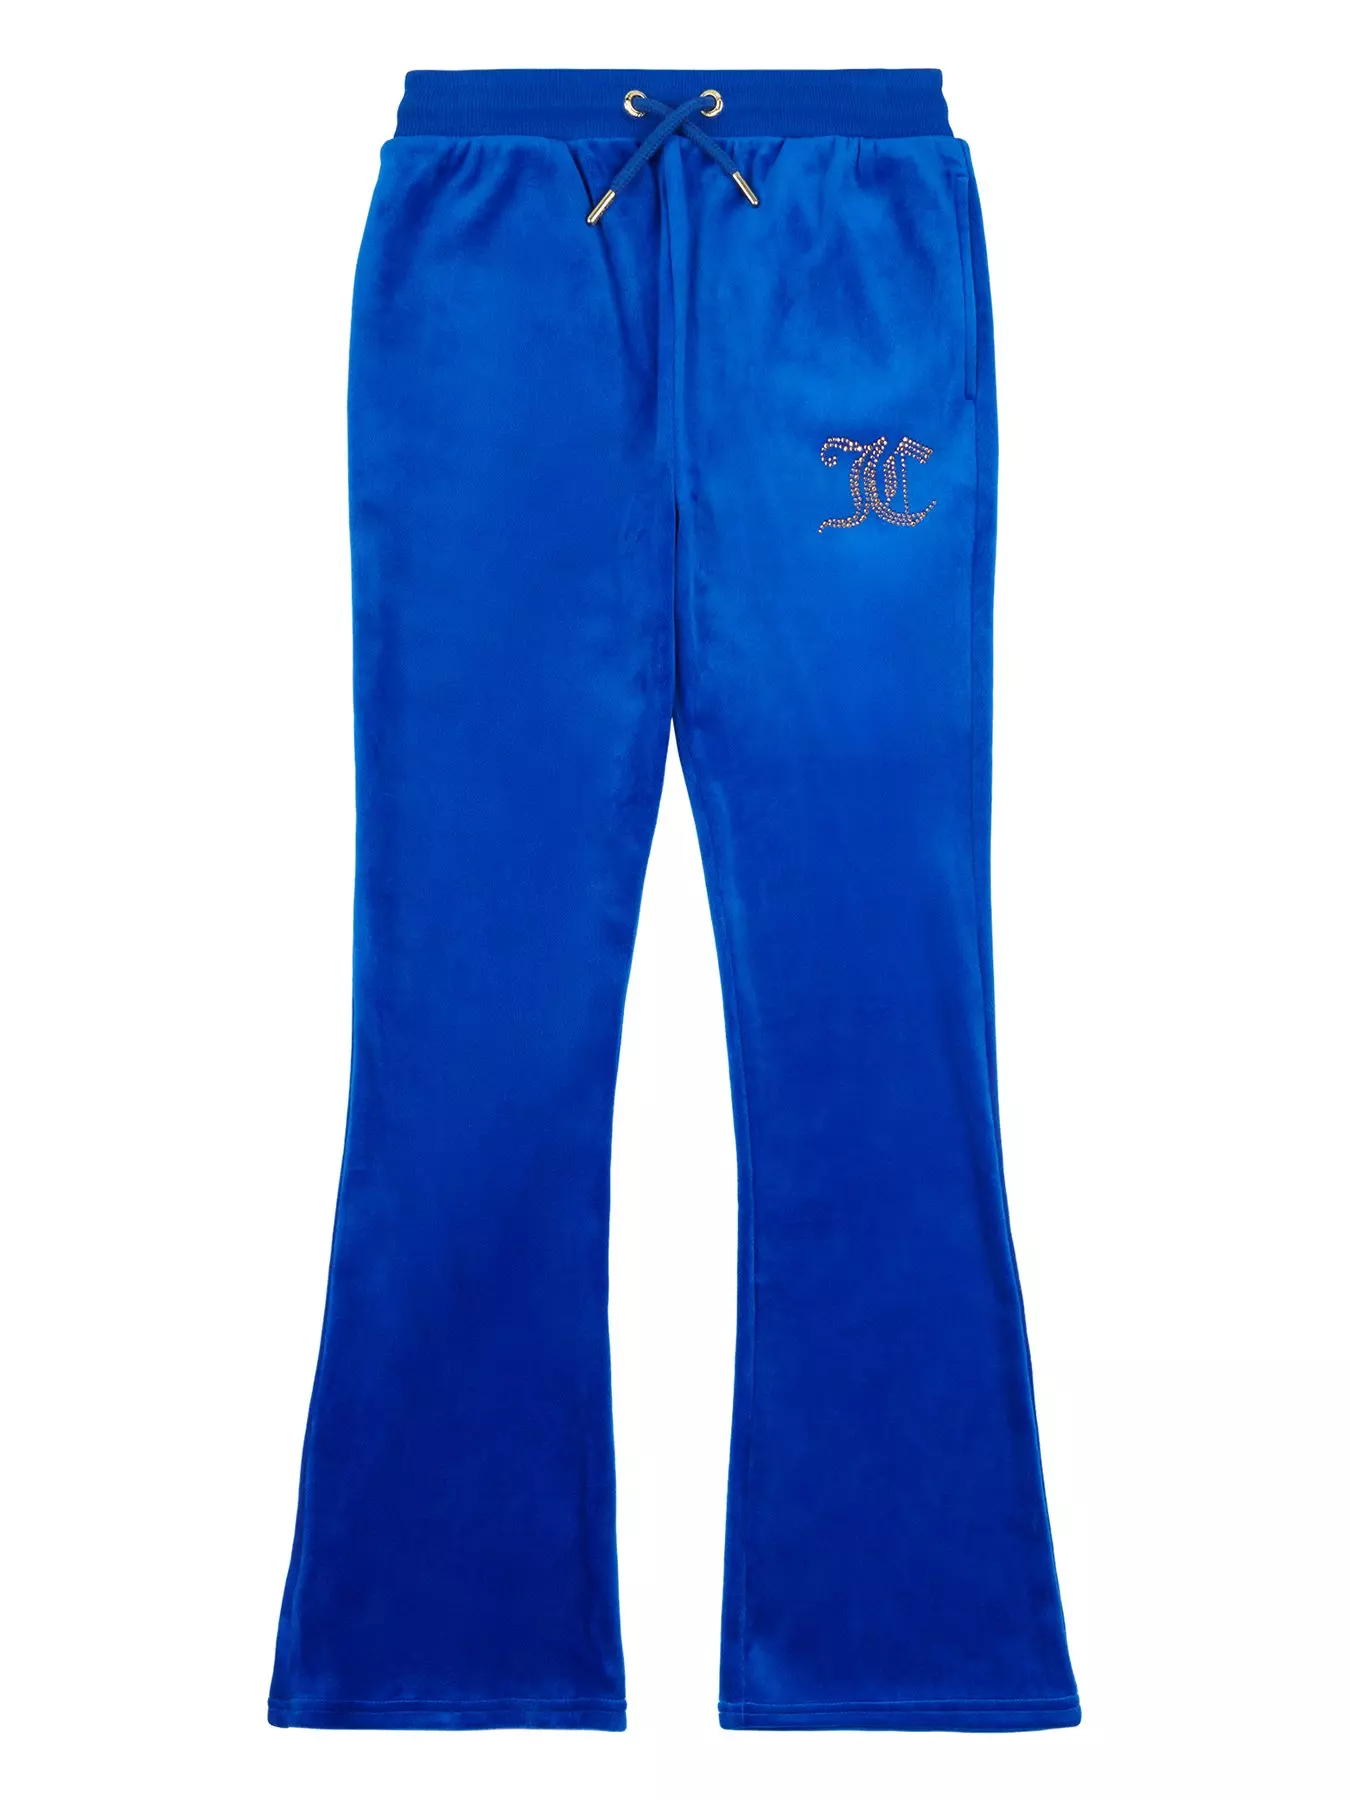 Juicy Couture Kids Velour Bootcut Sweatpants (7-16 Years)